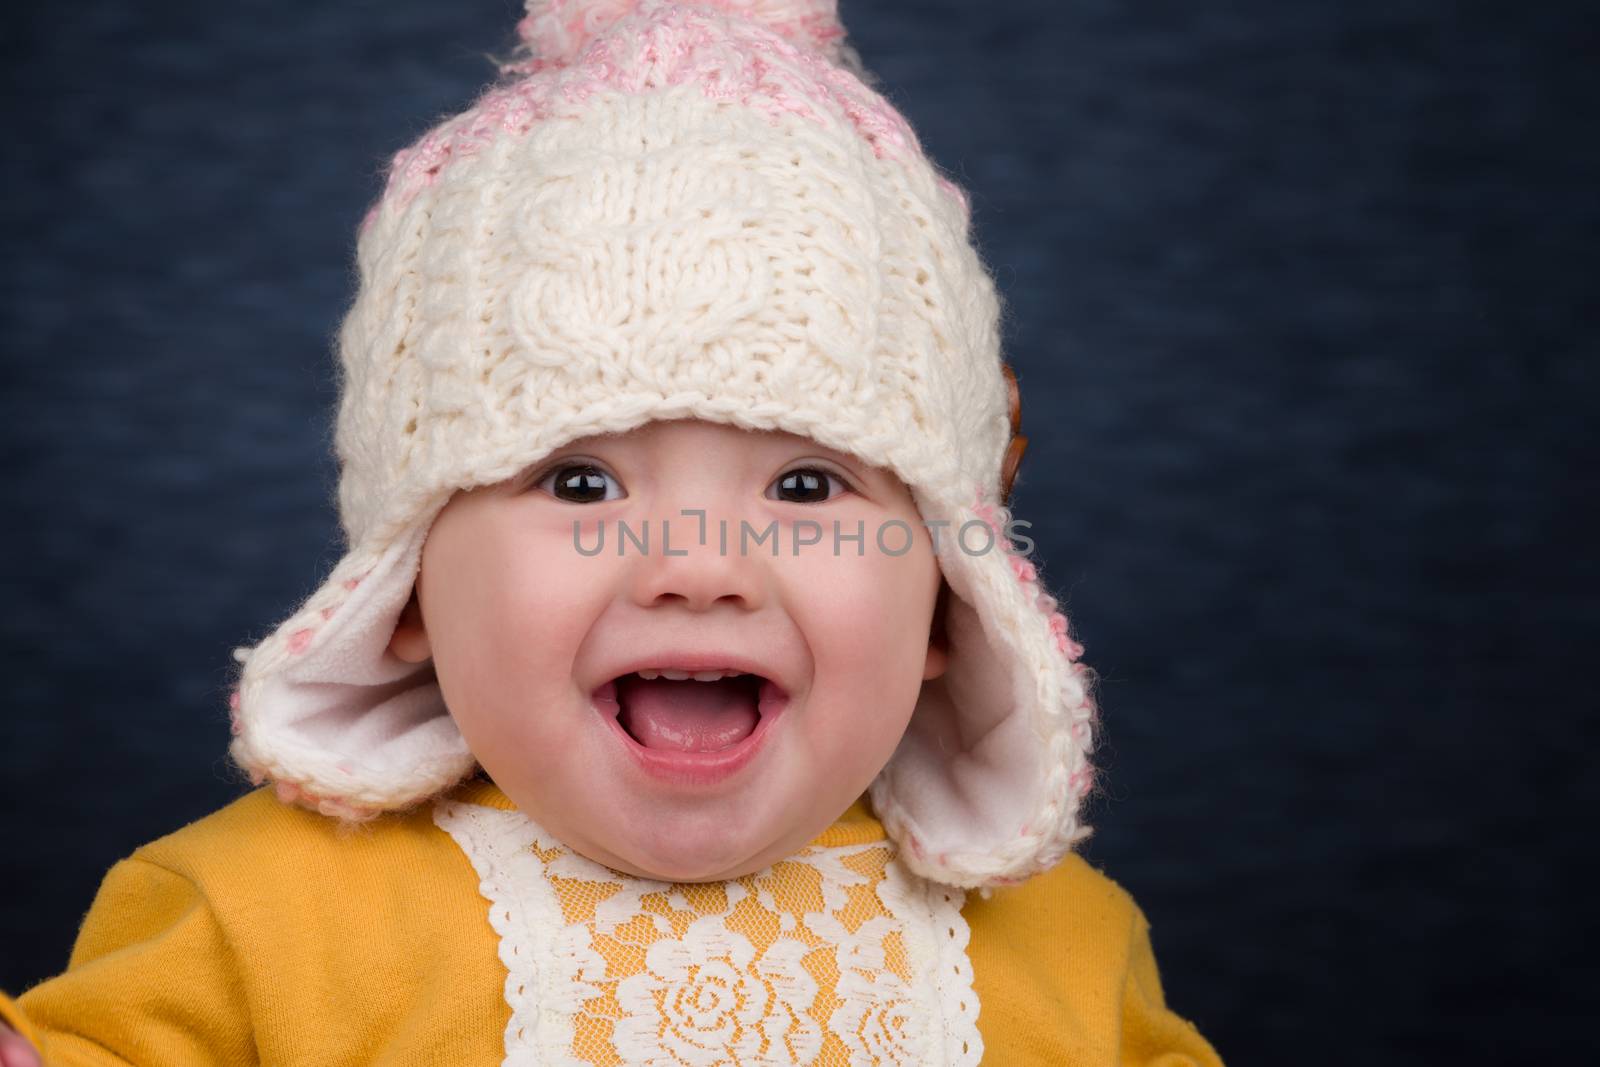 A smiling baby girl wearing a knit winter hat.